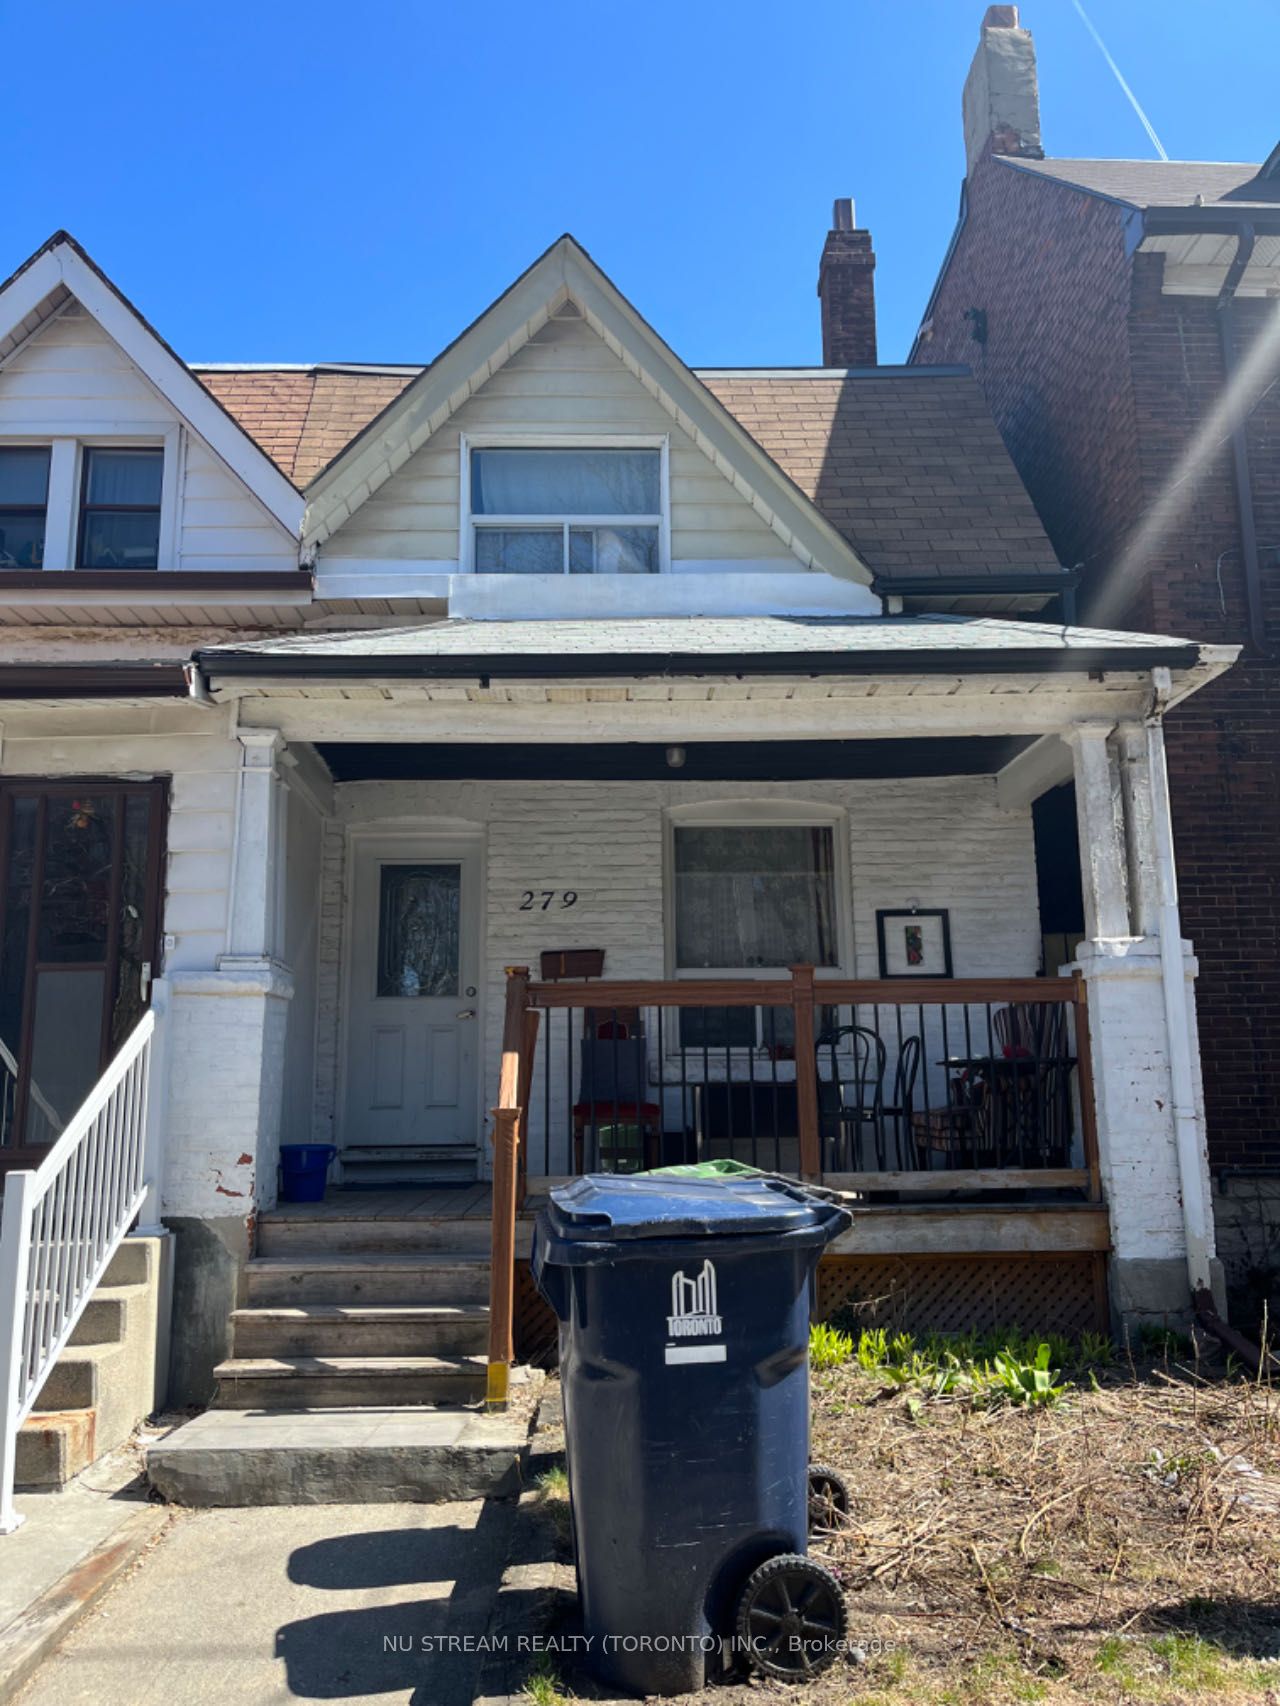 Duplex house for sale at 279 St. Helen